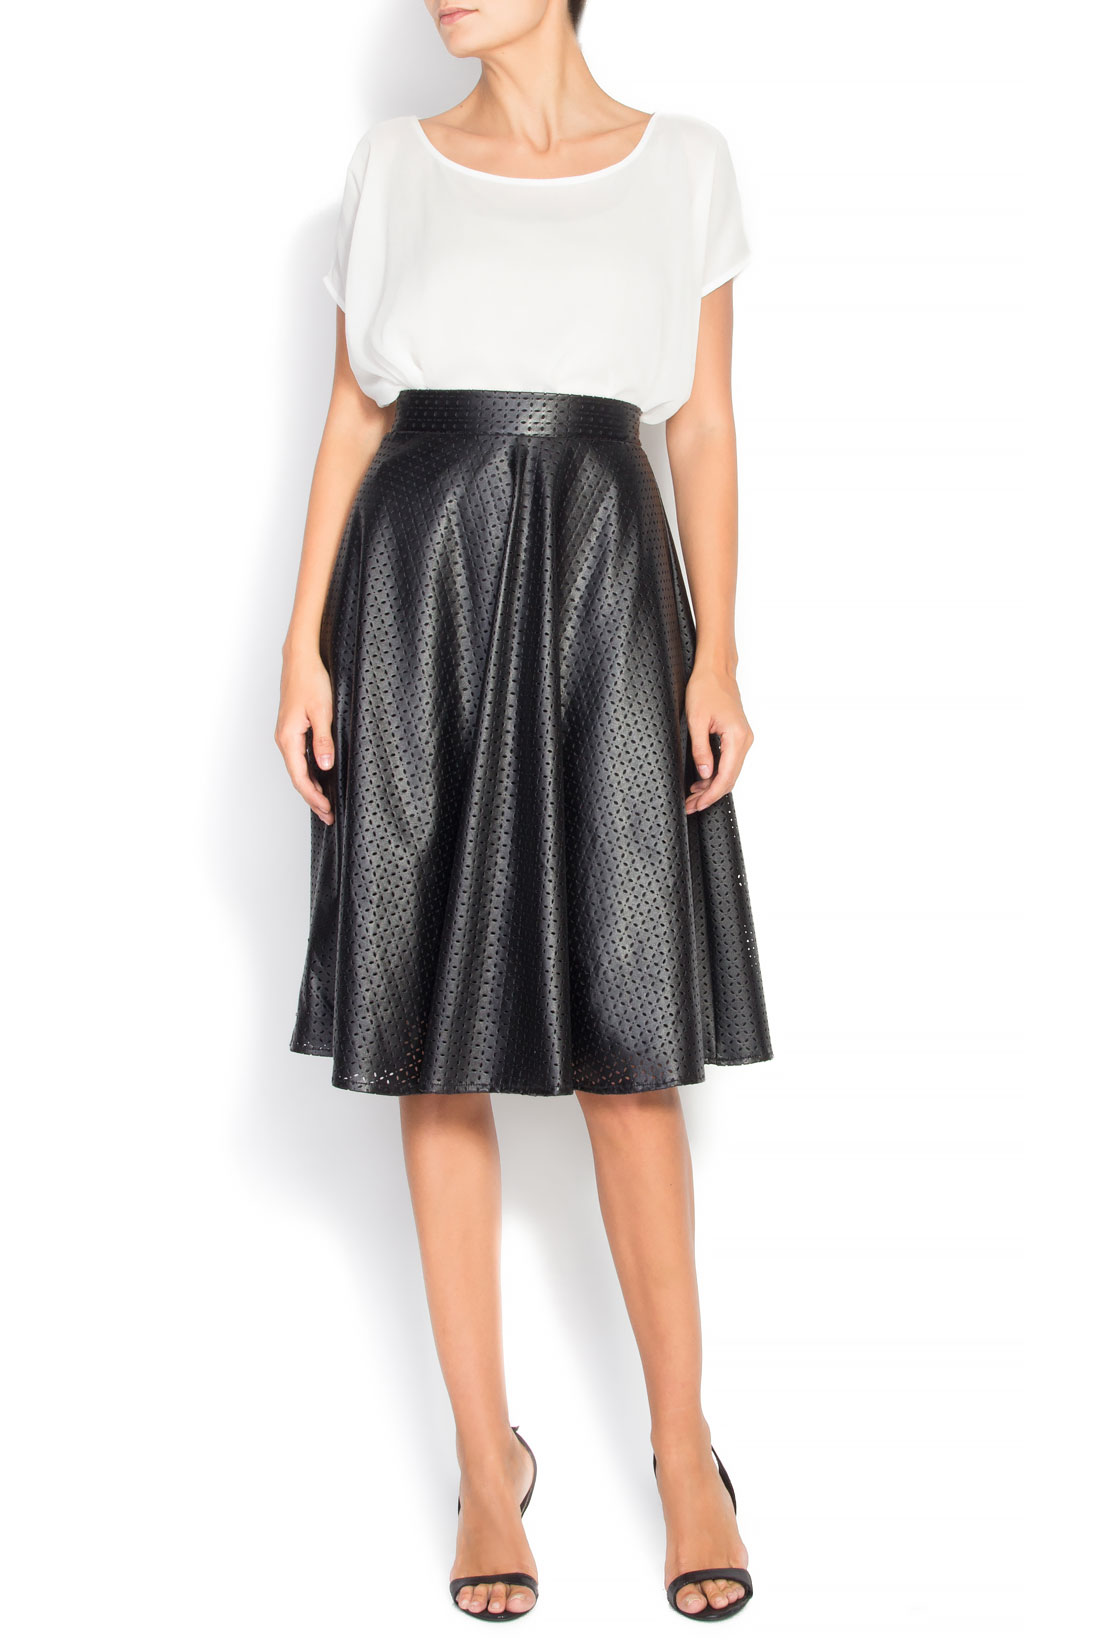 Perforated faux-leather skirt Bluzat image 0